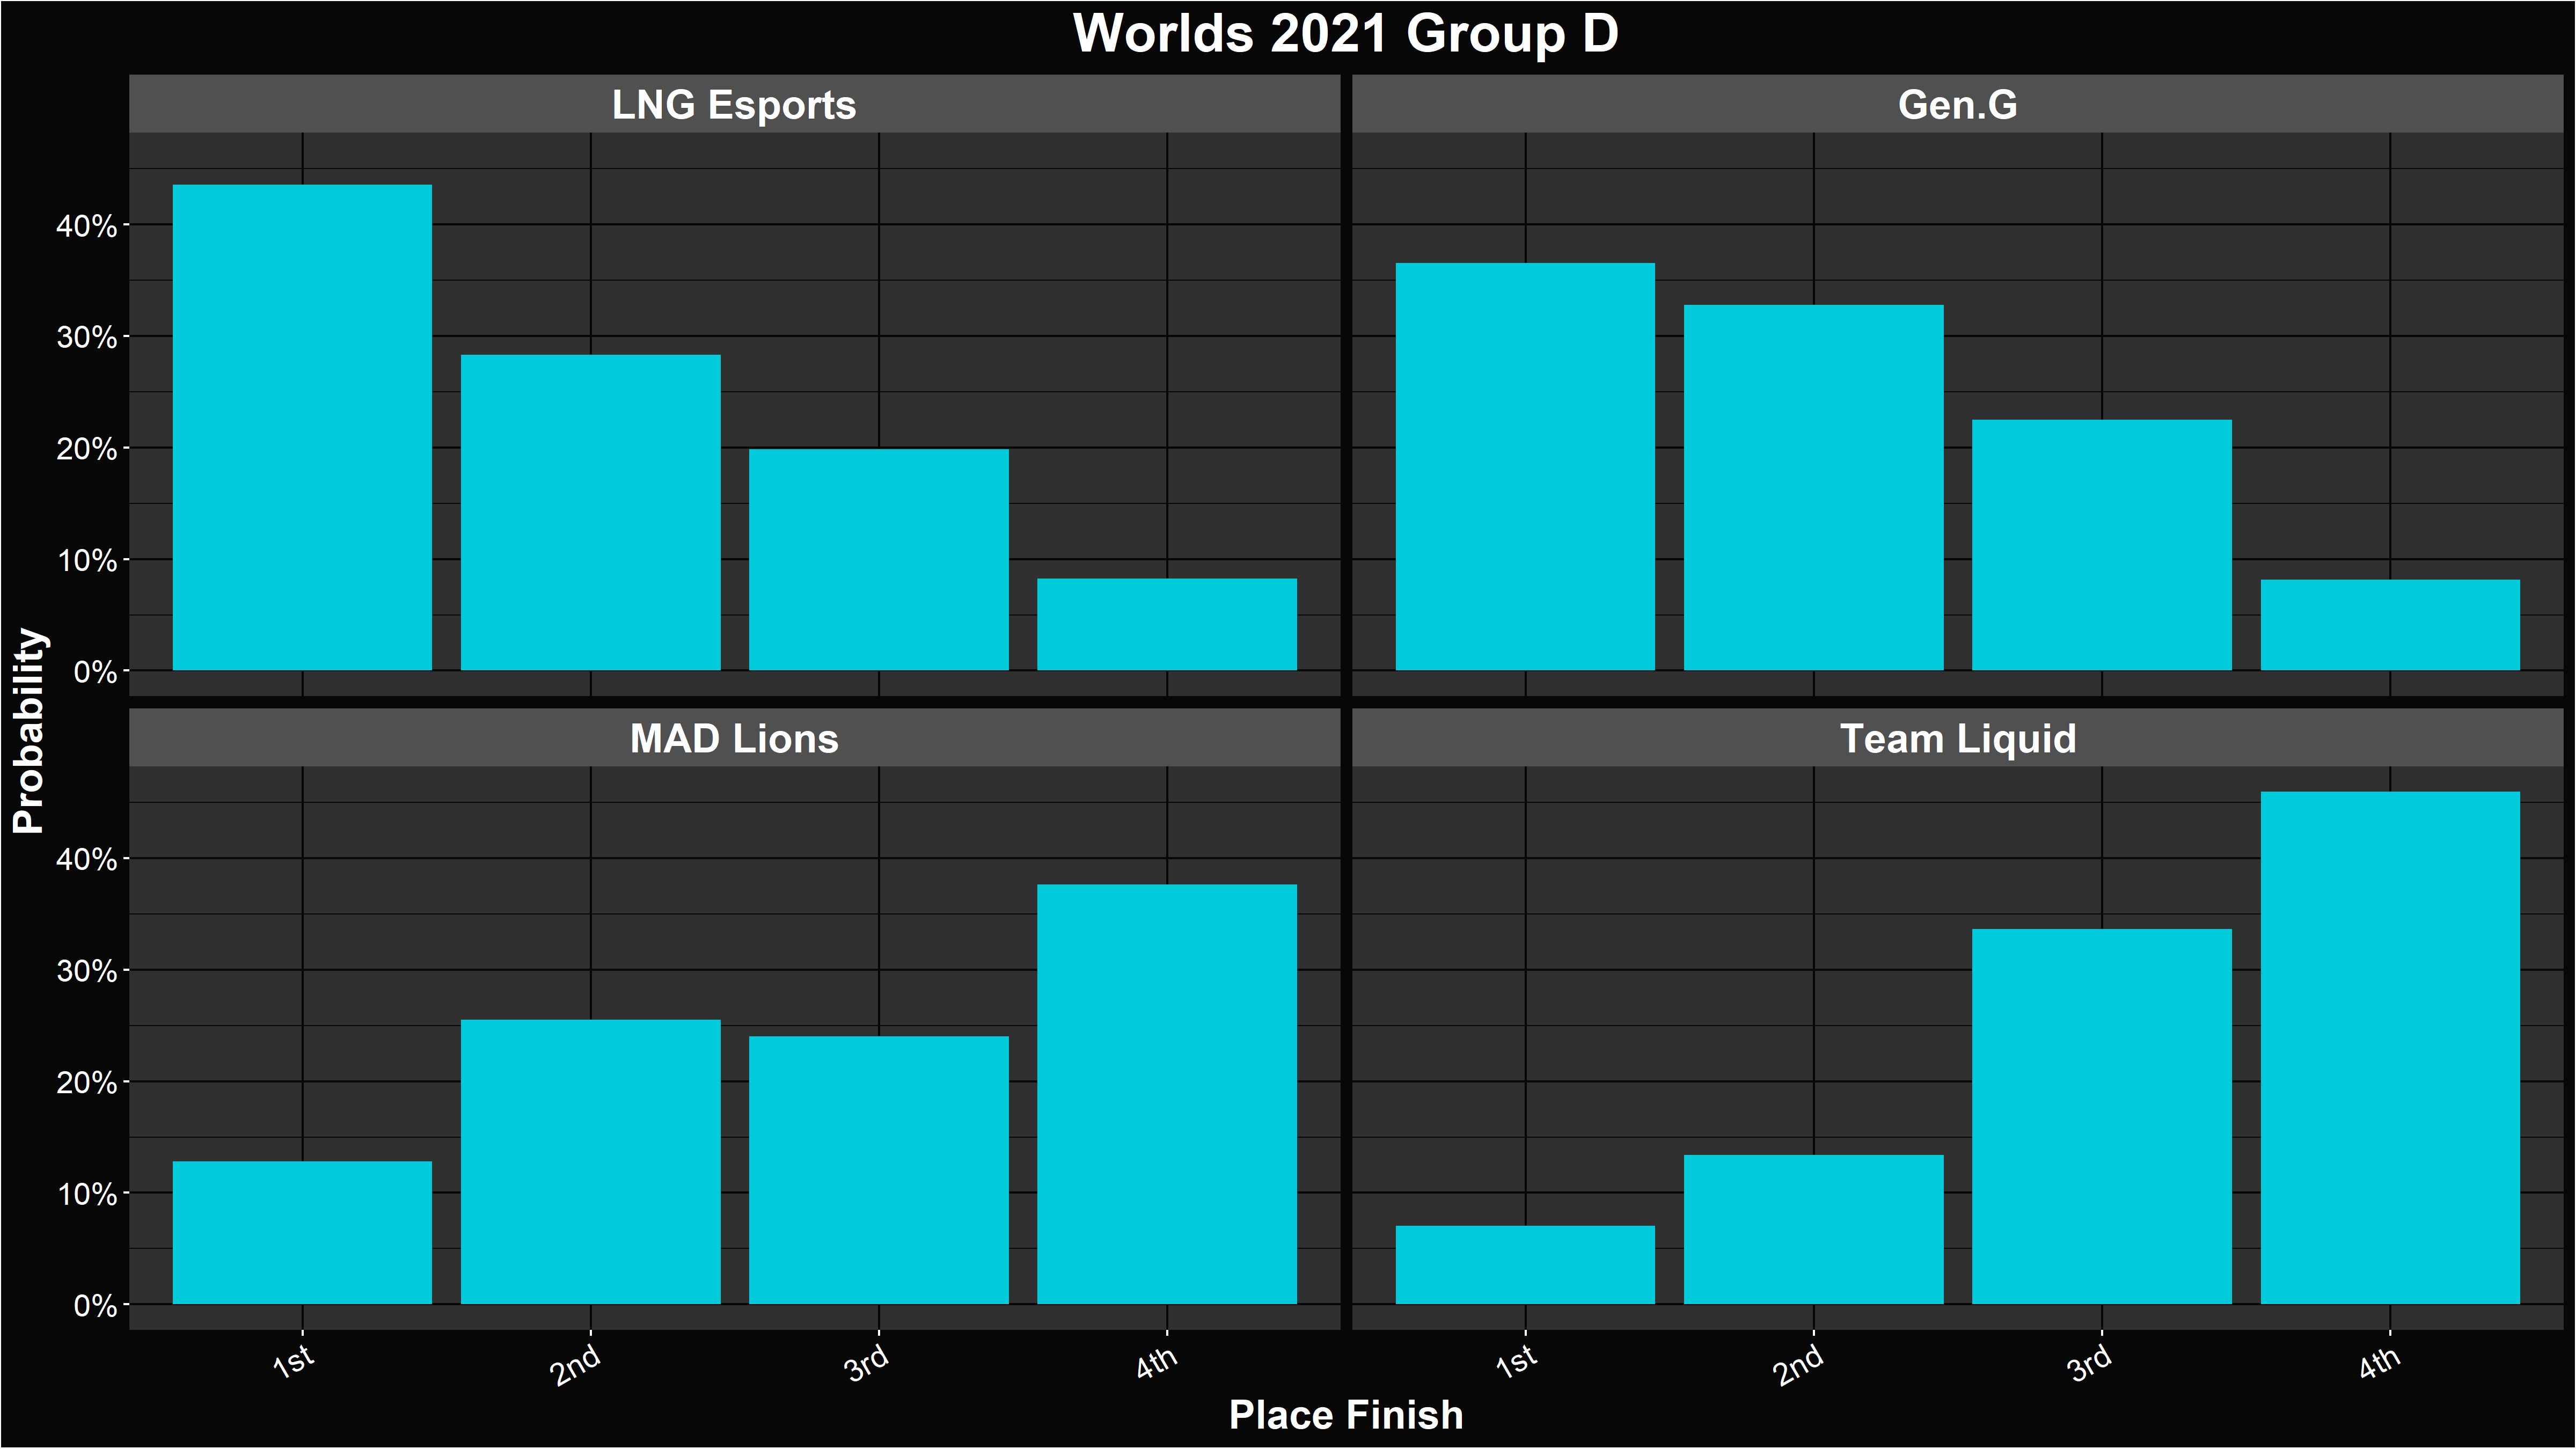 Alacrity's LoL Worlds 2021 Group D Placement Distributions